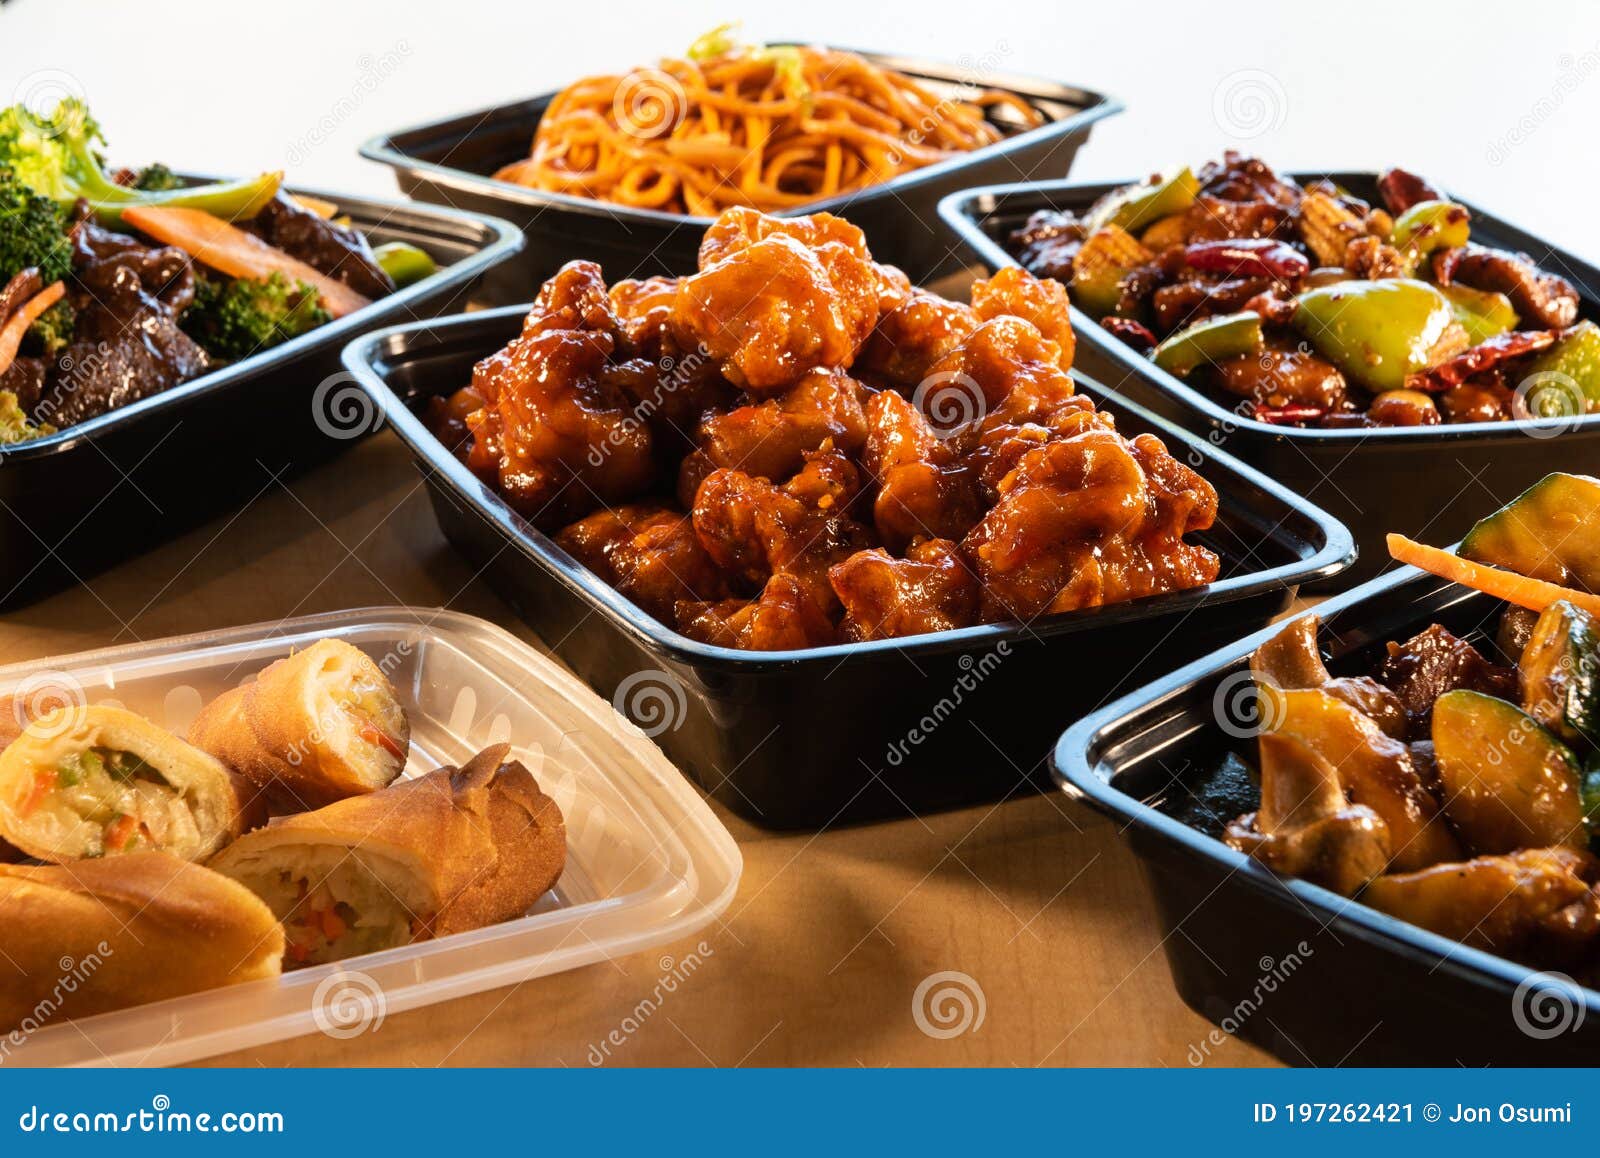 Fast Chinese Food always Tastes Delicious Stock Image - Image of family,  buffet: 197262421